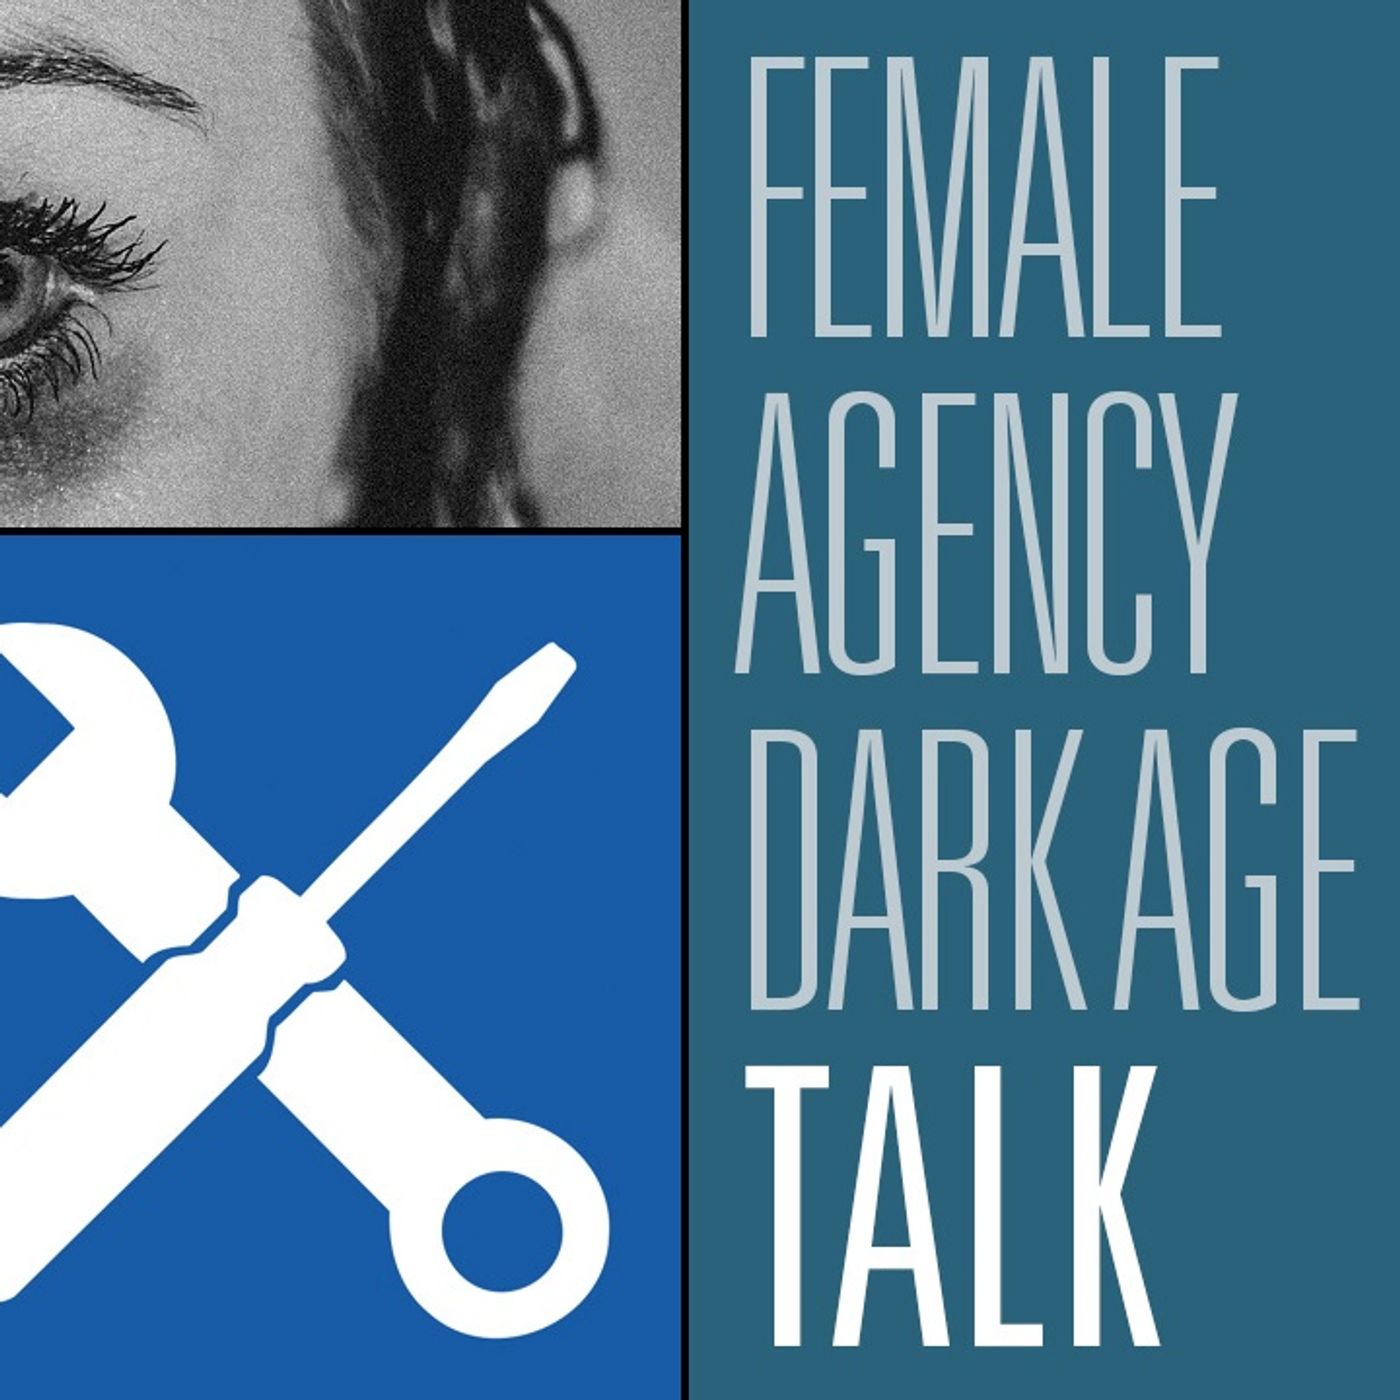 Is female agency going to crap? | HBR Talk 181